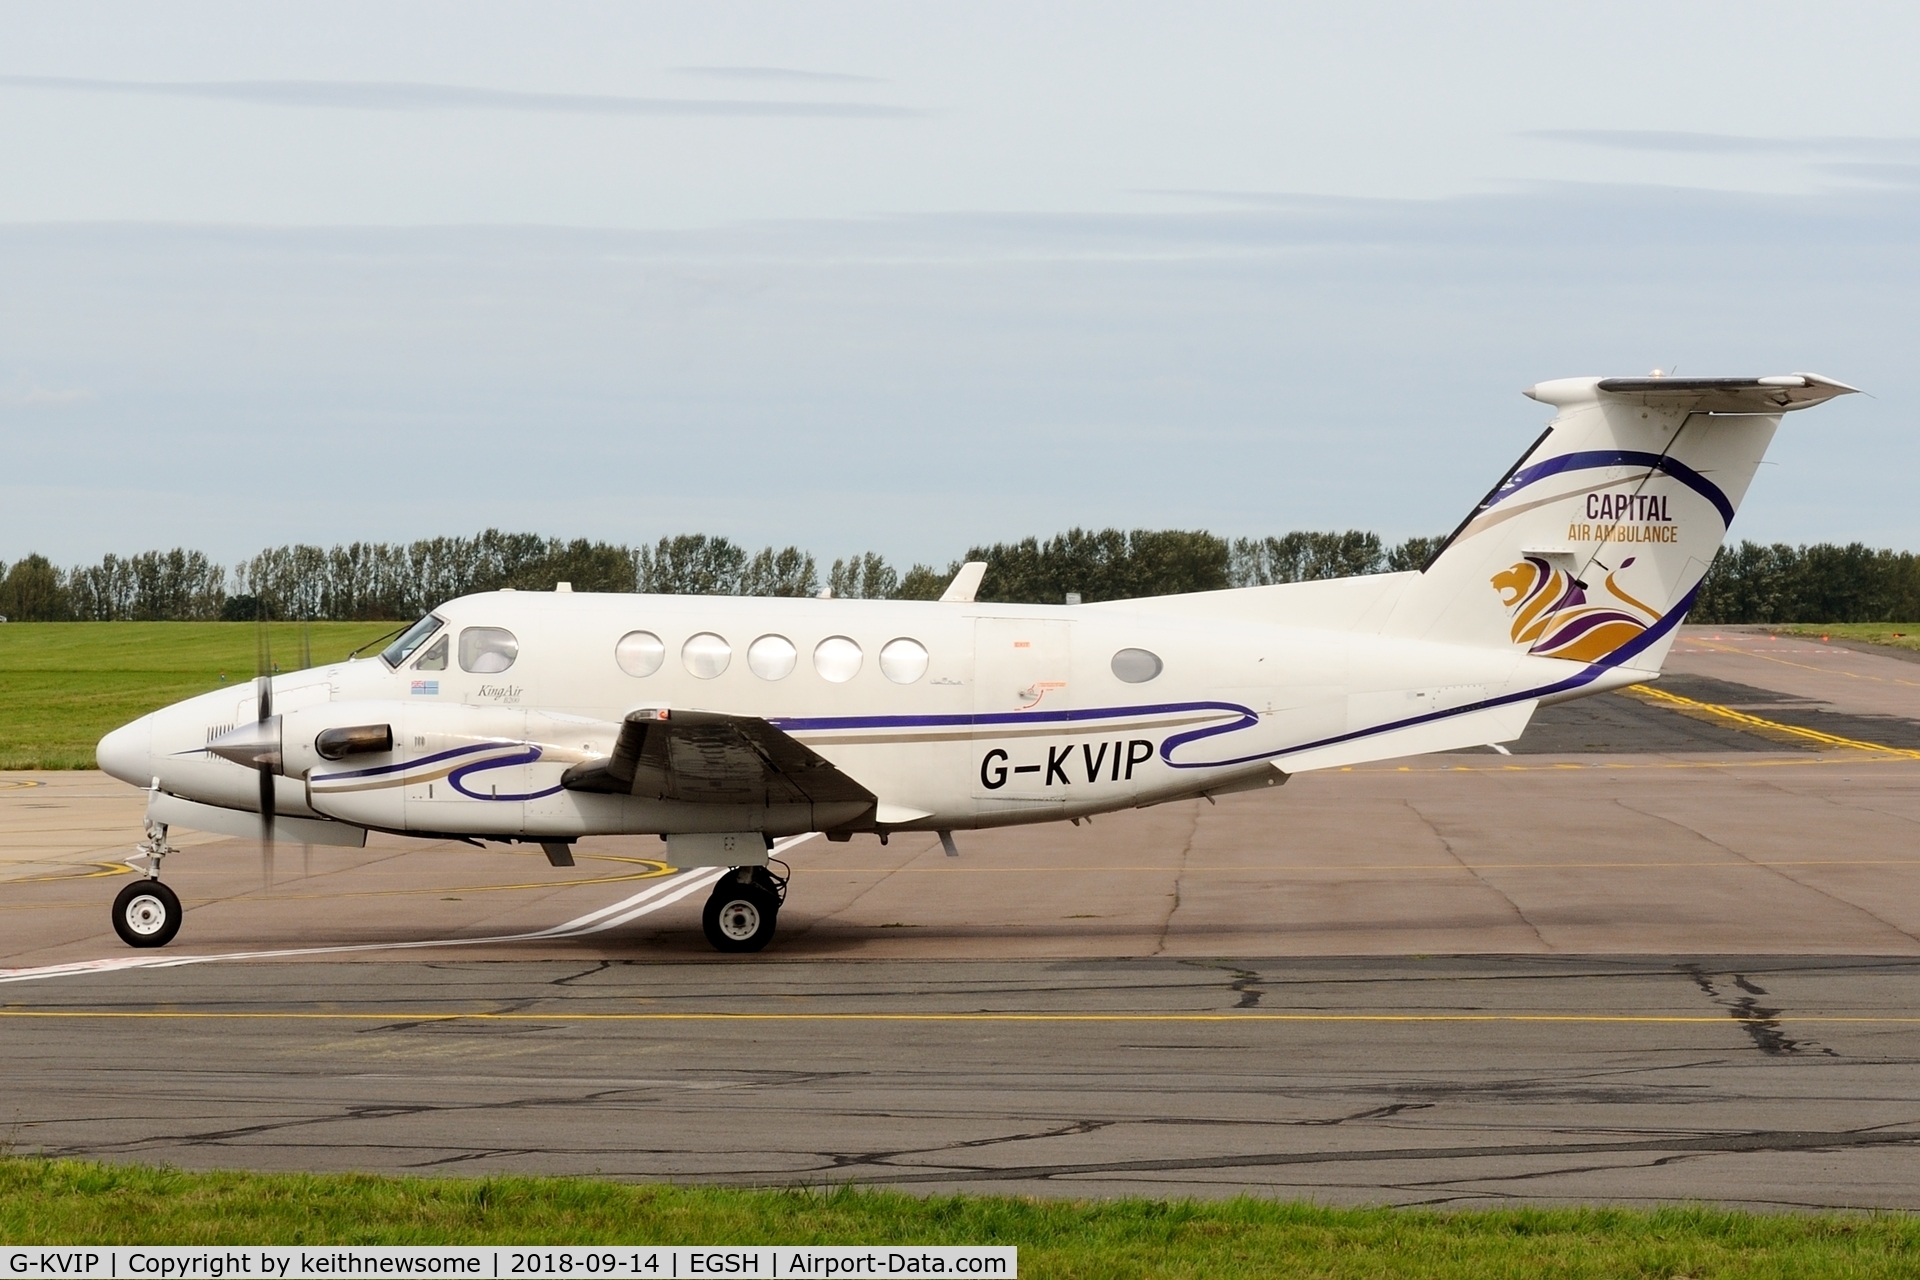 G-KVIP, 1979 Beech 200 Super King Air C/N BB-487, Regular visitor with later colour scheme.